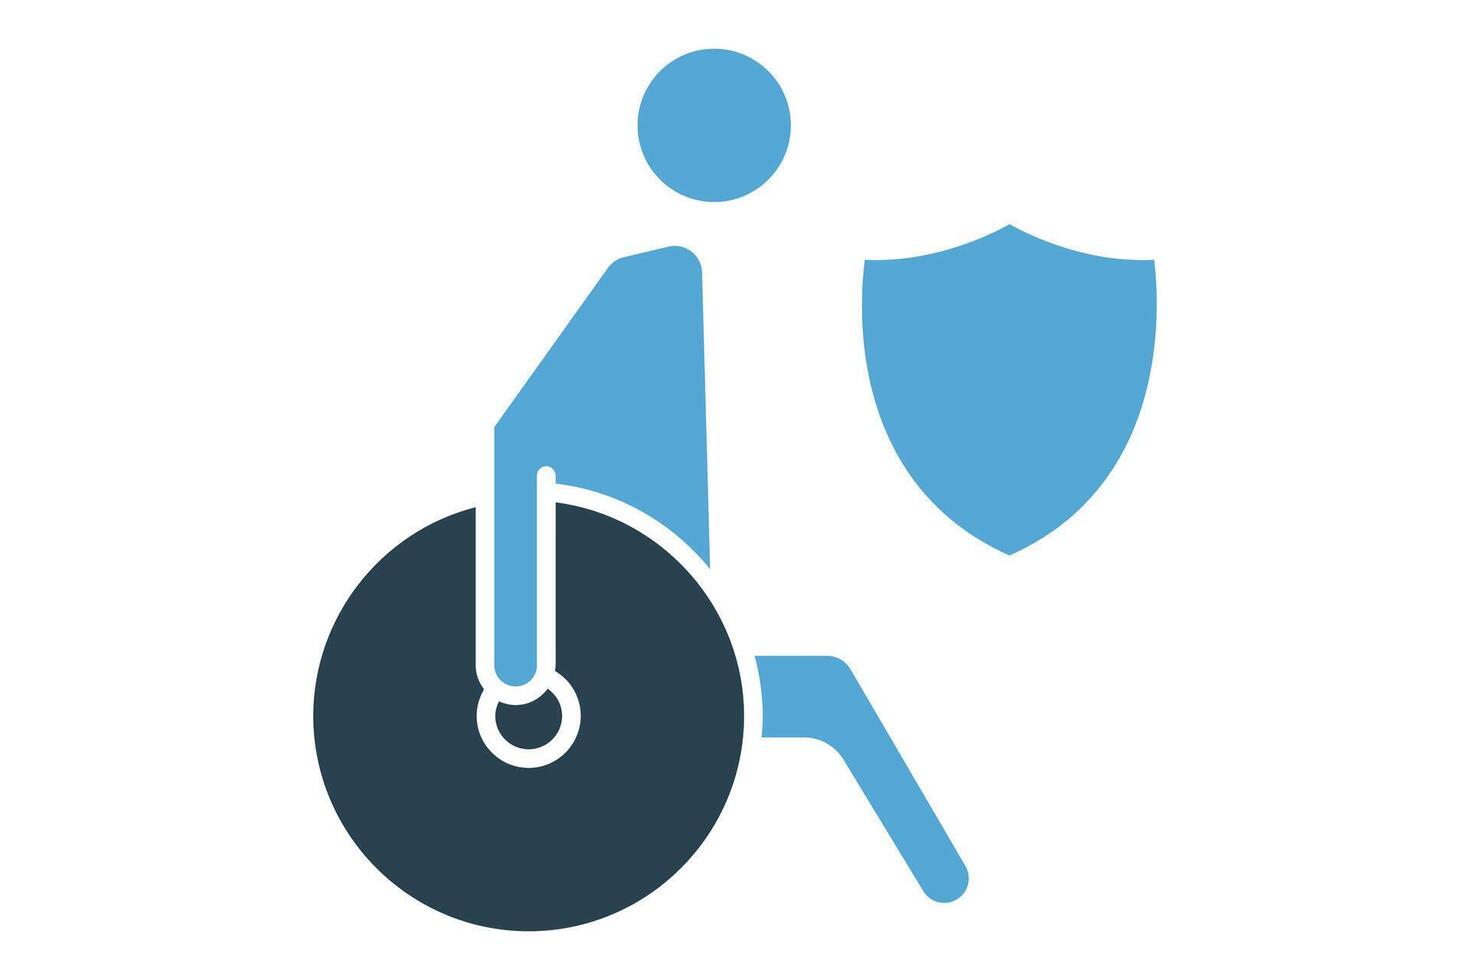 disability insurance icon. wheelchair icon with shield. icon related to disability. solid icon style. element illustration vector